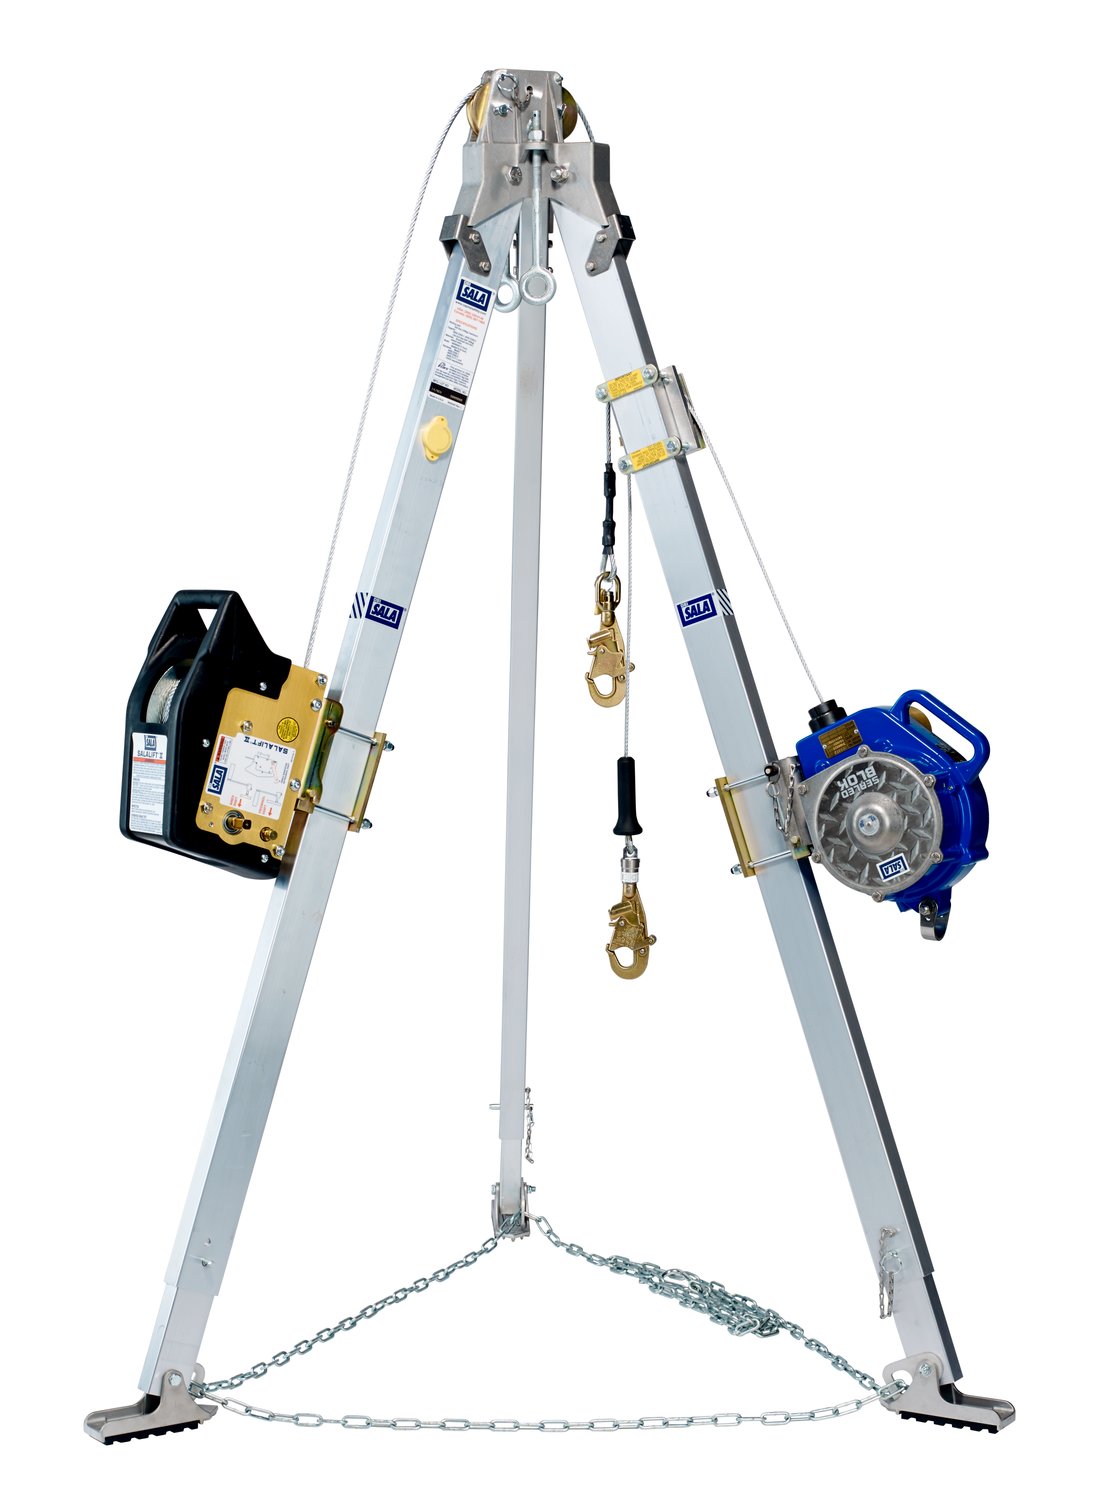 7100311025 - 3M DBI-SALA Confined Space Aluminum Tripod with Winch and 3-Way SRL
8301042, 7 ft High, 60 ft and 50 ft Stainless Steel Cable